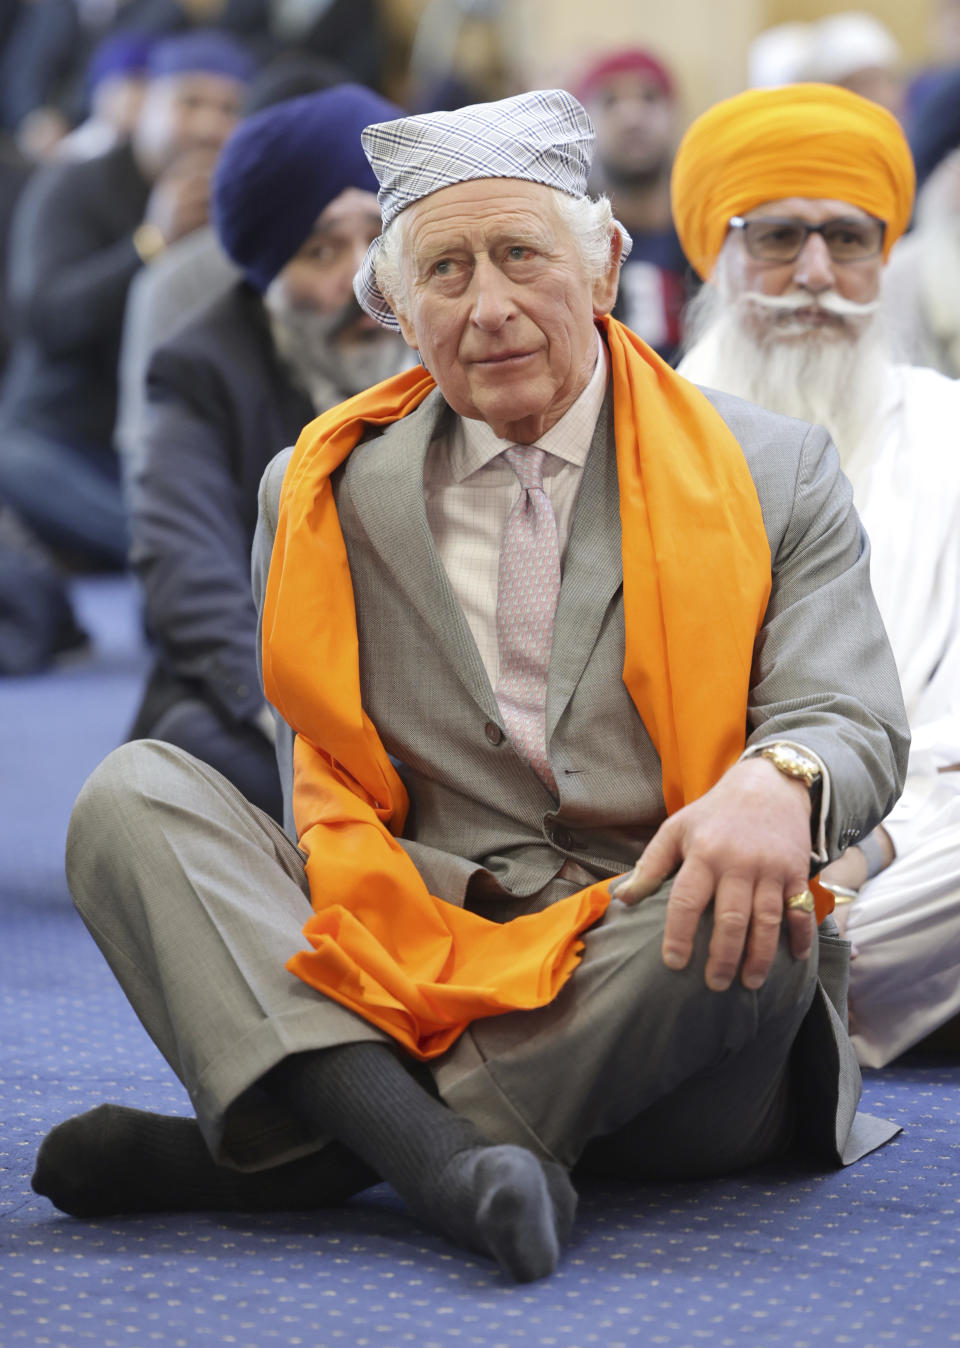 FILE - Britain's King Charles III sits on the floor in the Prayer Hall during a visit to the newly built Guru Nanak Gurdwara, in Luton, England, Tuesday, Dec. 6, 2022. (Chris Jackson/Pool Photo via AP, File)